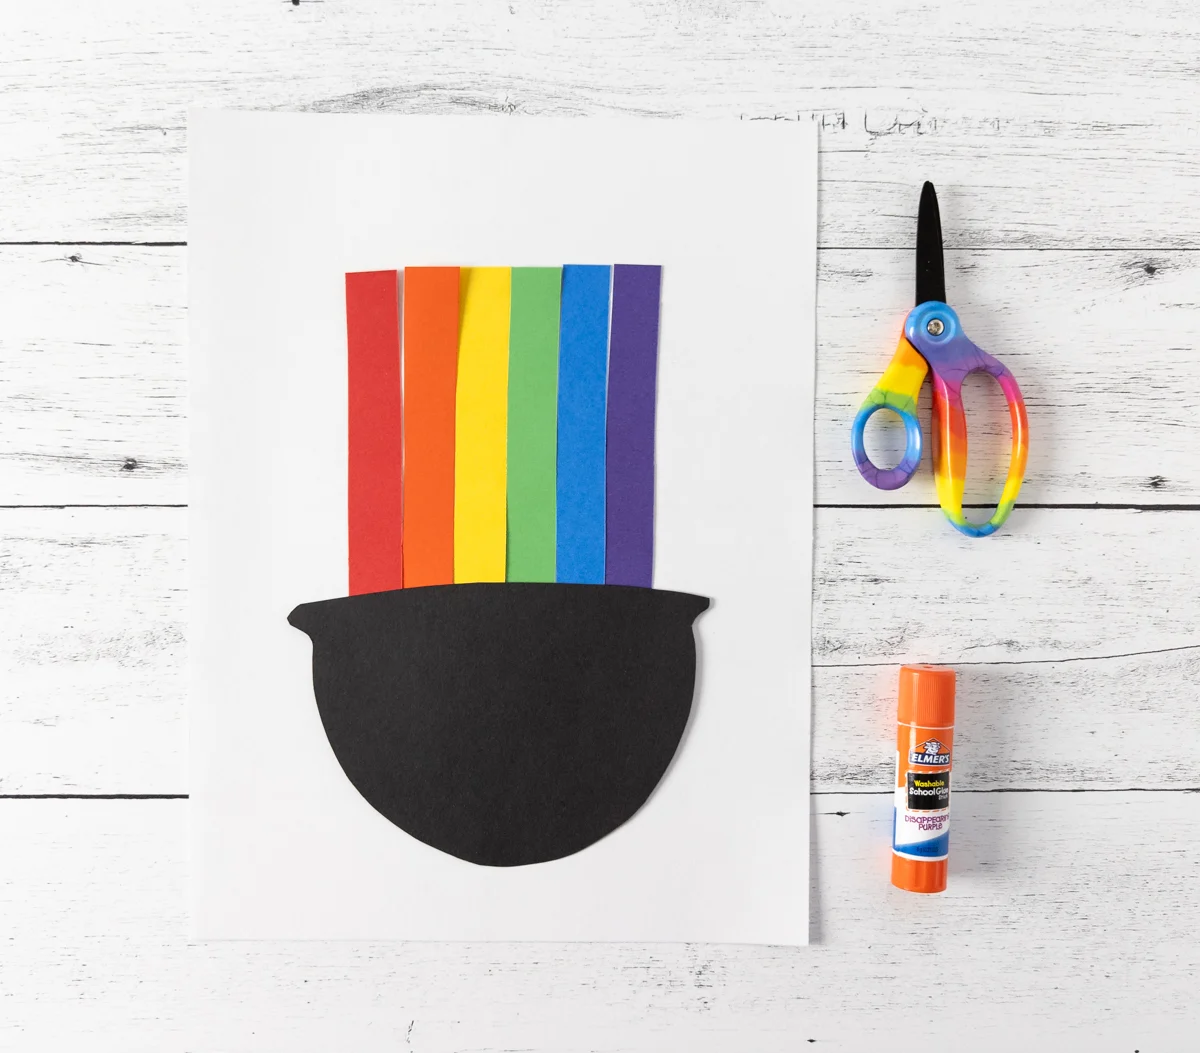 Black paper cauldron shape cut out and glued down overlapping the bottom of vertical rainbow stripes.